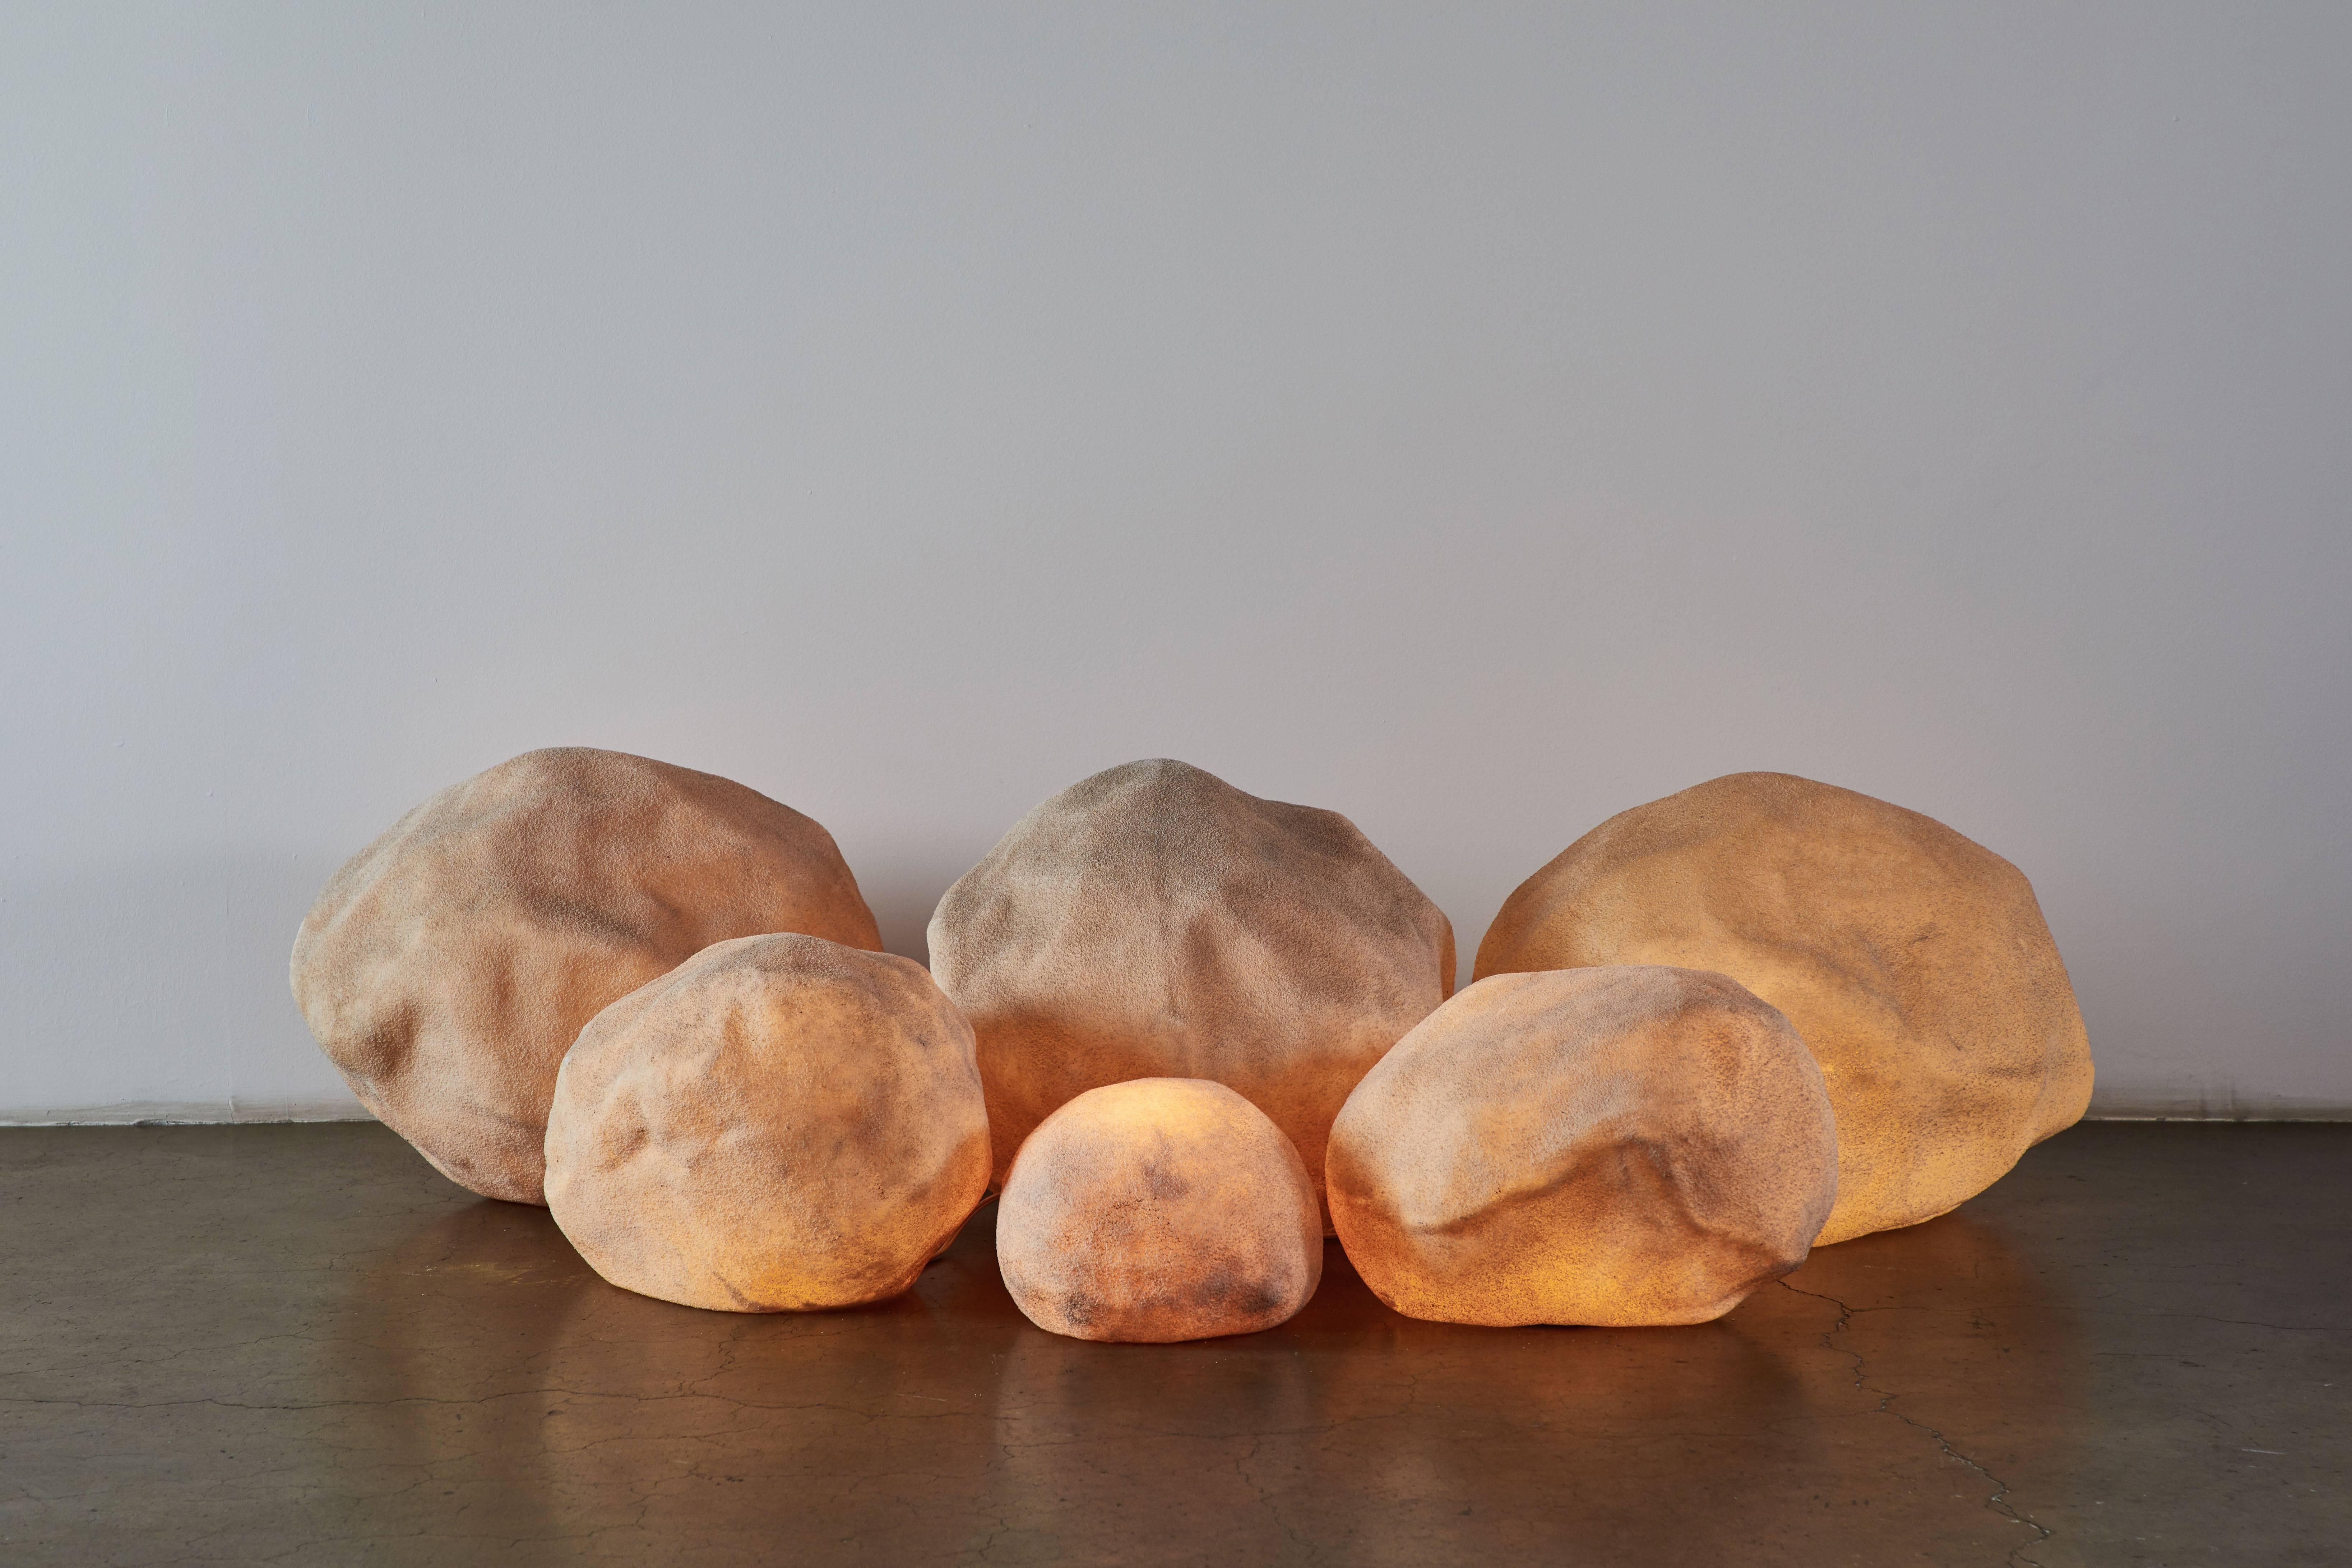 Set of six hand cast fiberglass rocks. Sold in various sizes as a set. The price listed is for the set. Please contact dealer for individual pricing. Original wiring. Each light takes an E27 40w maximum bulb. Dimensions displayed are for largest